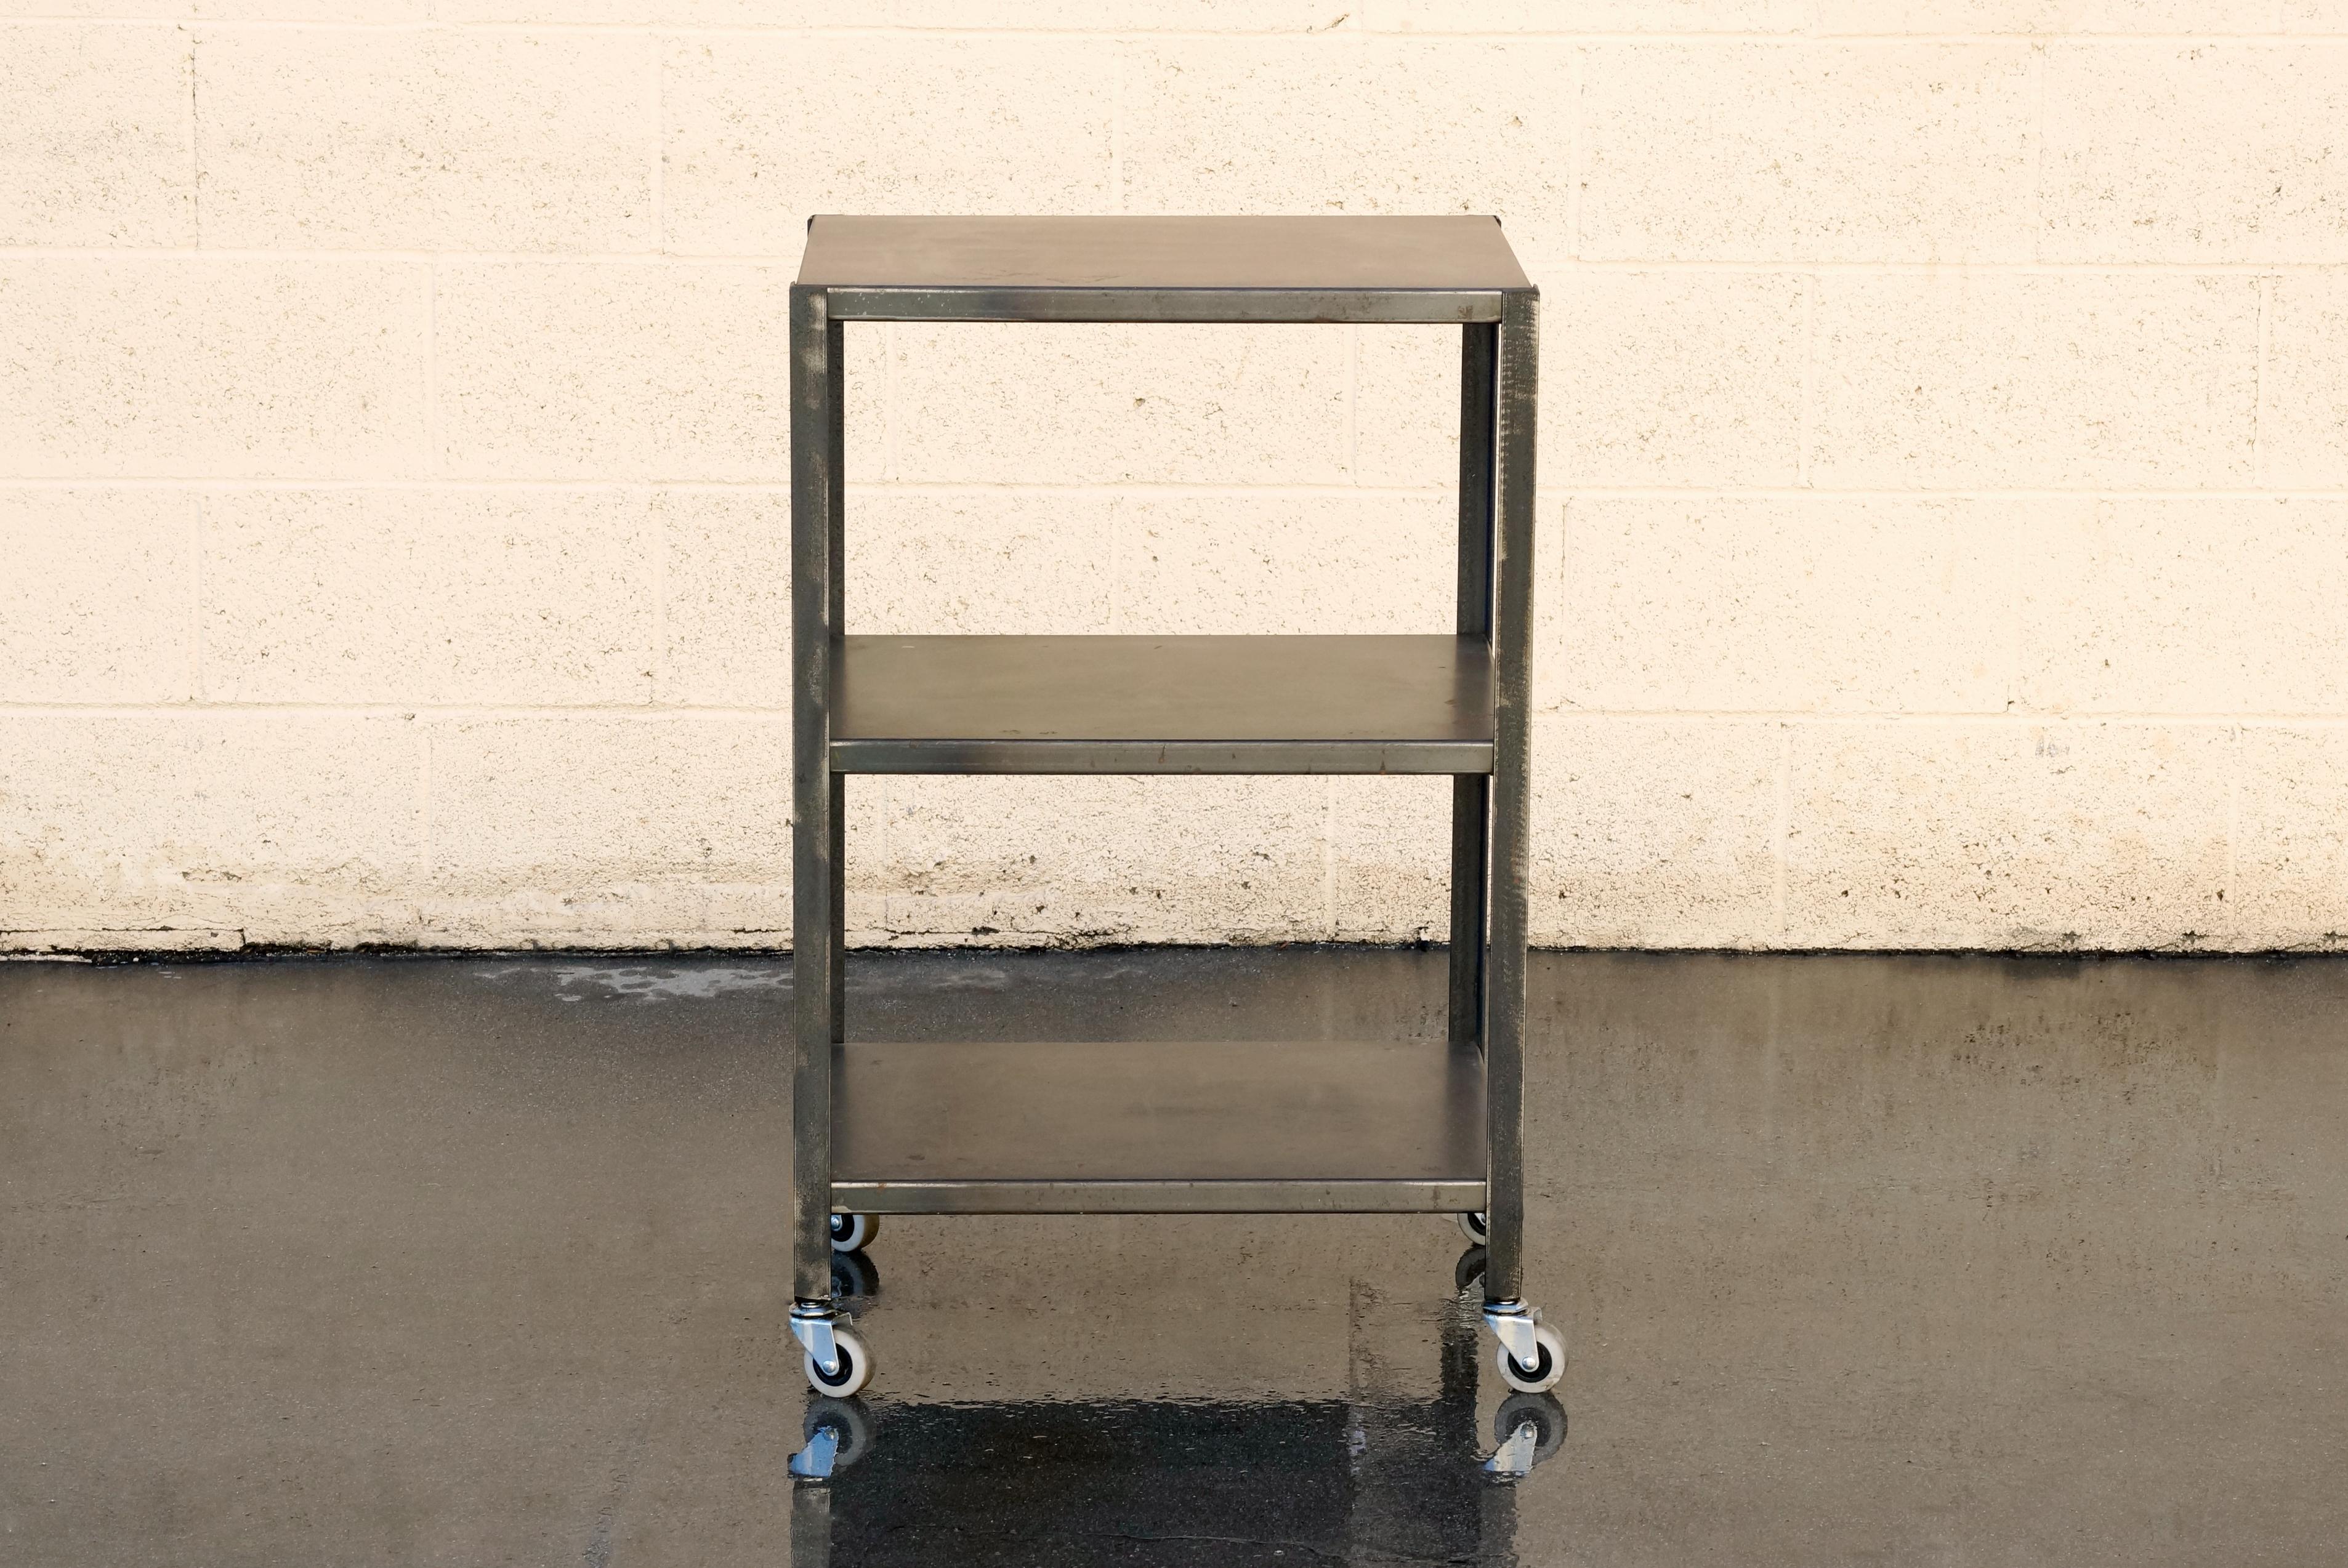 Our custom made three-tier steel rolling cart is a versatile piece perfectly suited in an office, workshop or for retail display. Quality made to order in our Los Angeles shop. Designed with a lovely variegated patina, lightly clear-coated. Can be